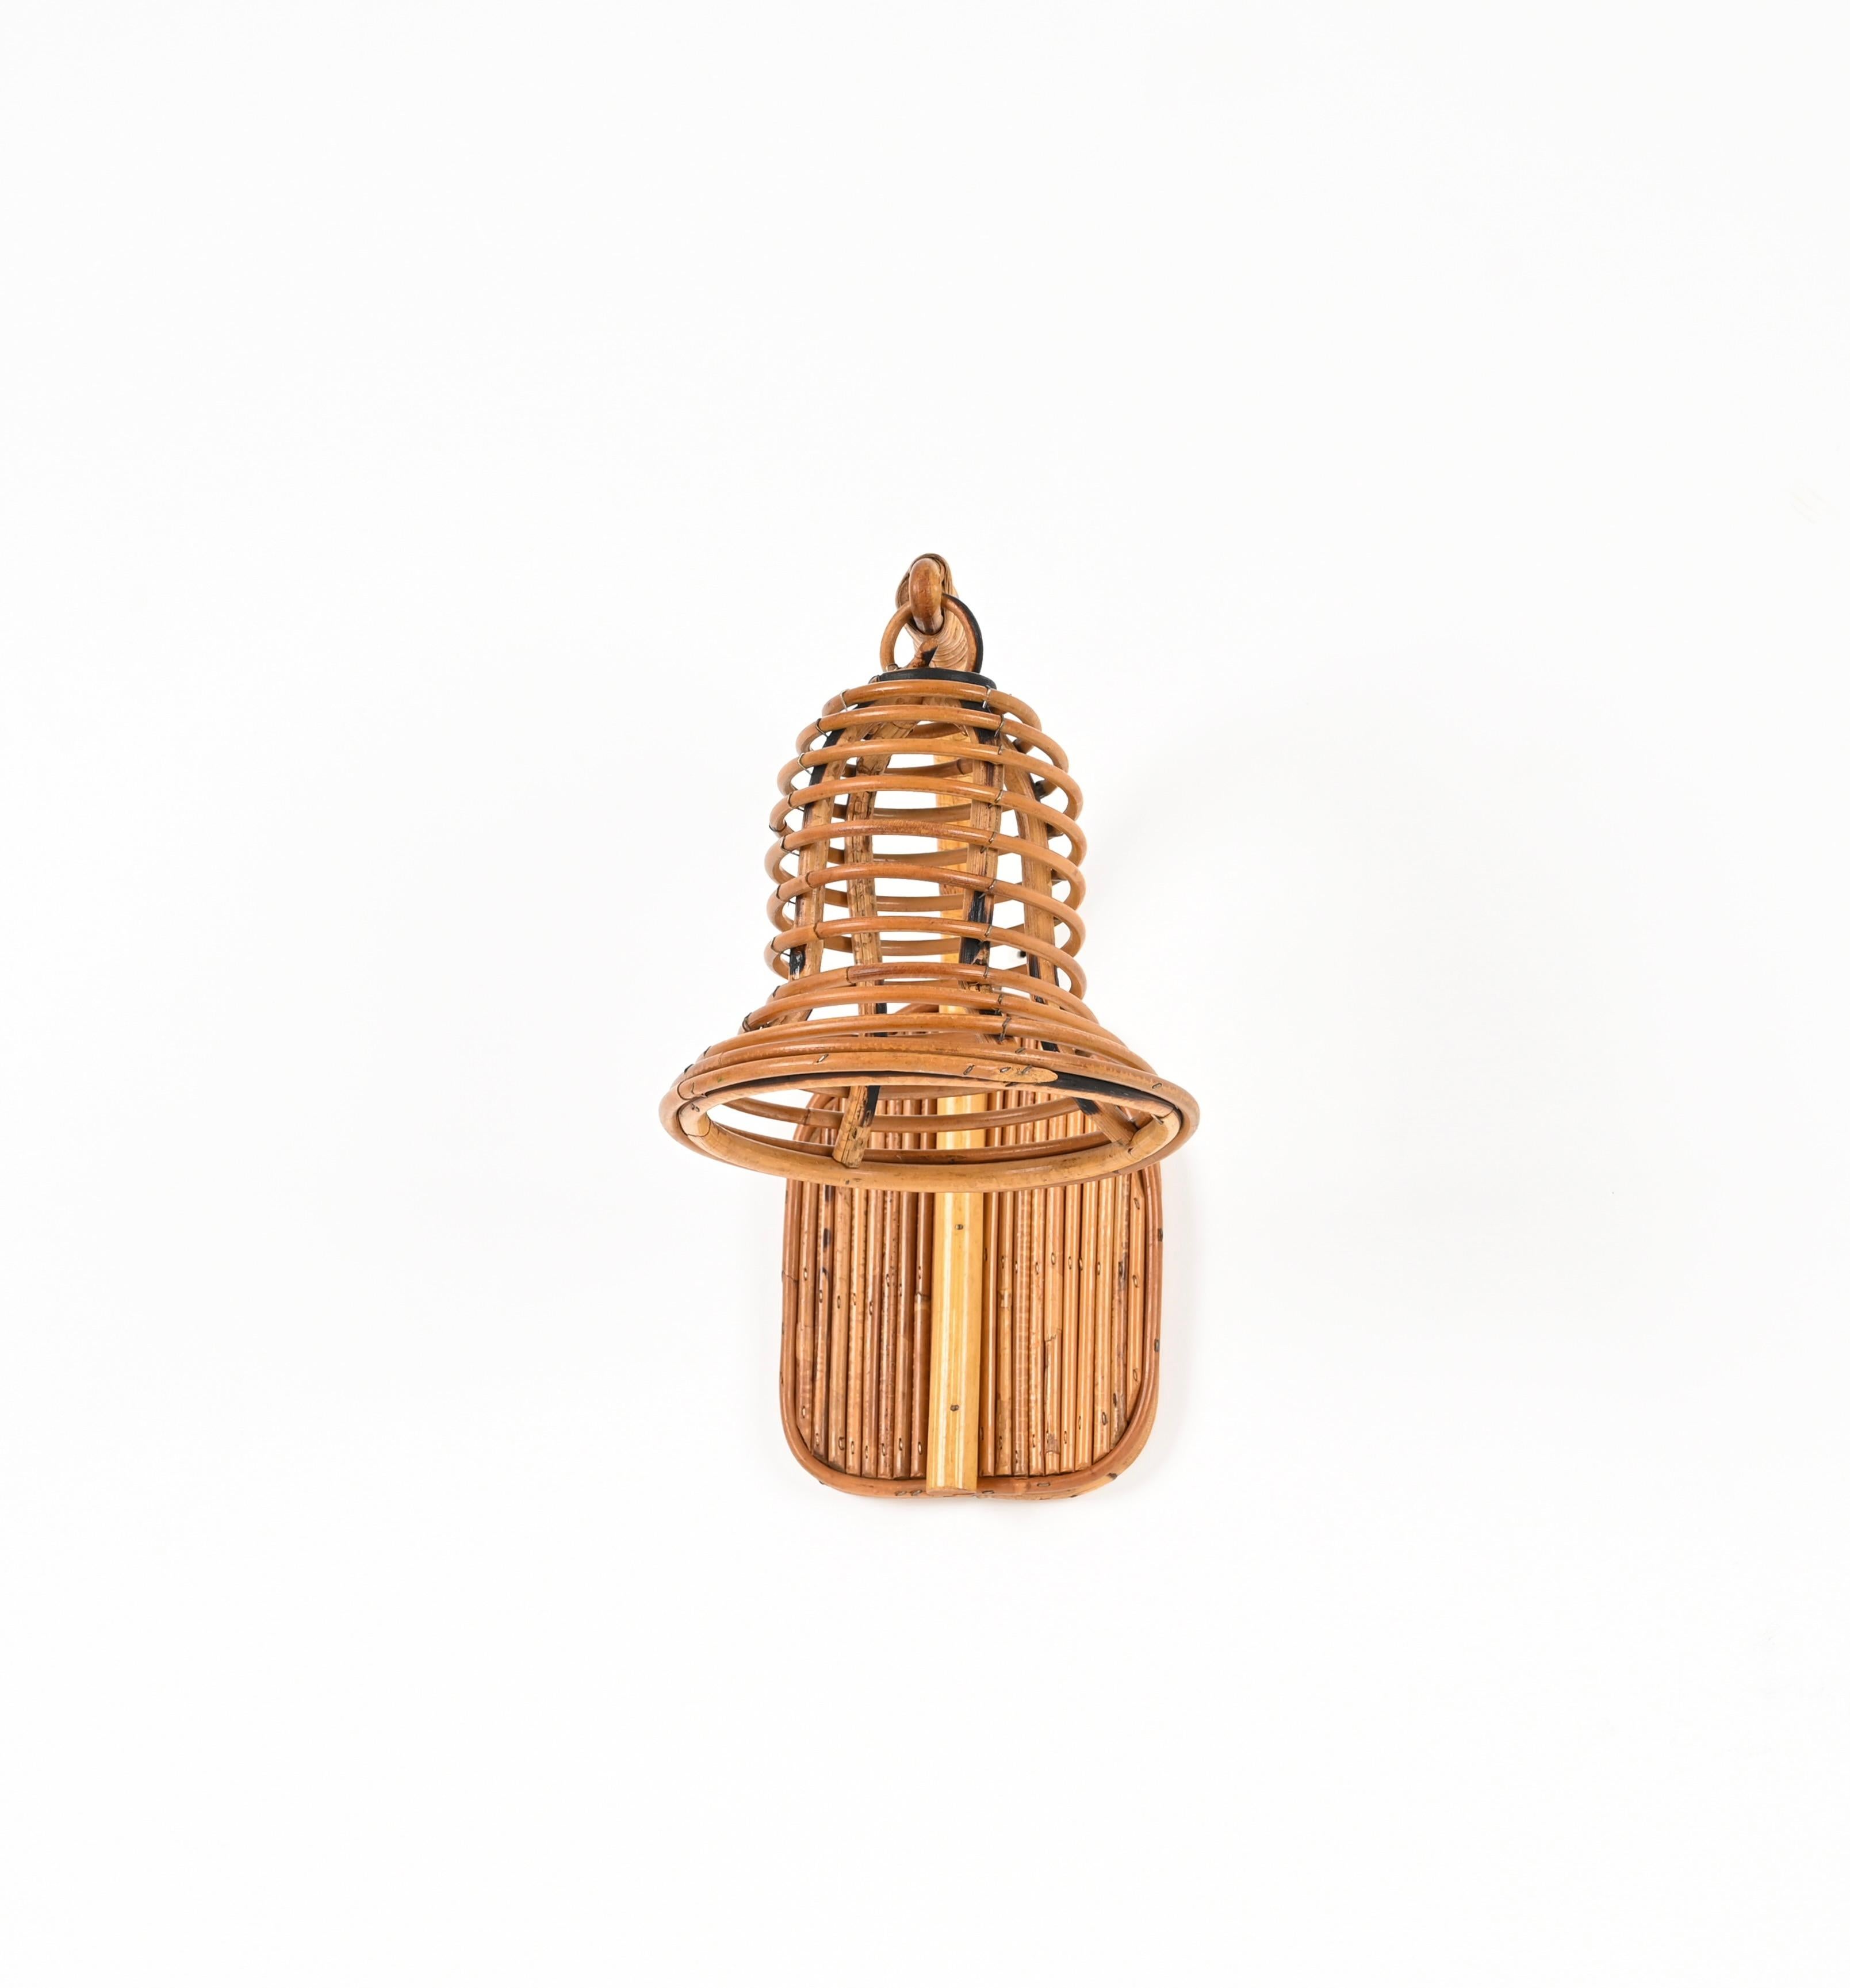 Bamboo French Riviera Bell-Shaped Rattan and Wicker Sconce, Louis Sognot, France 1960s